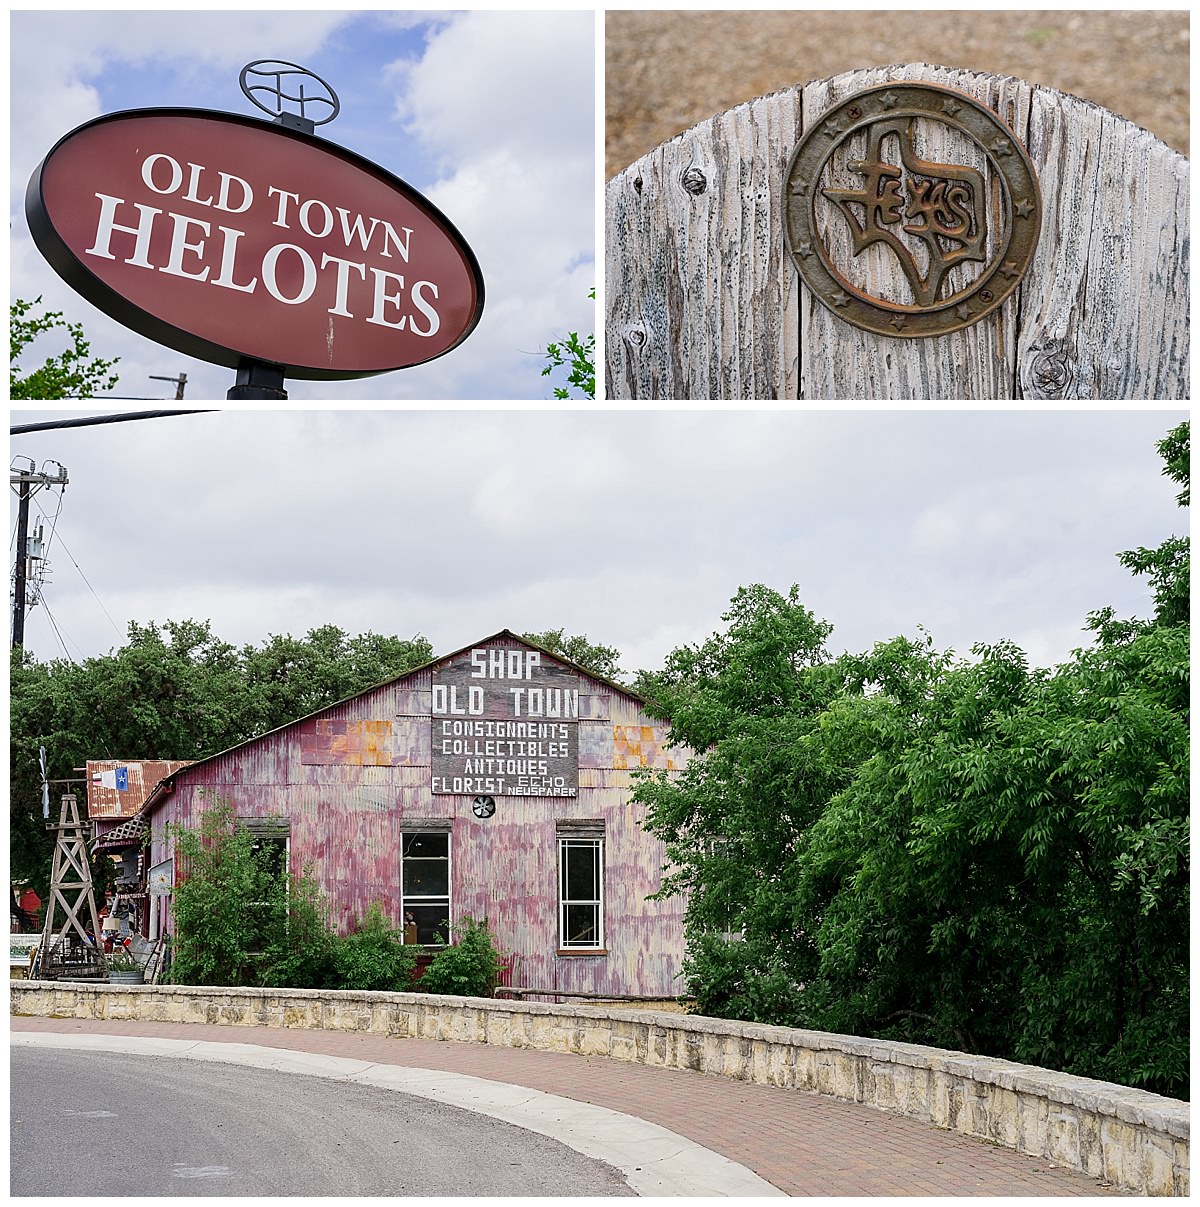 View of Helotes Texas